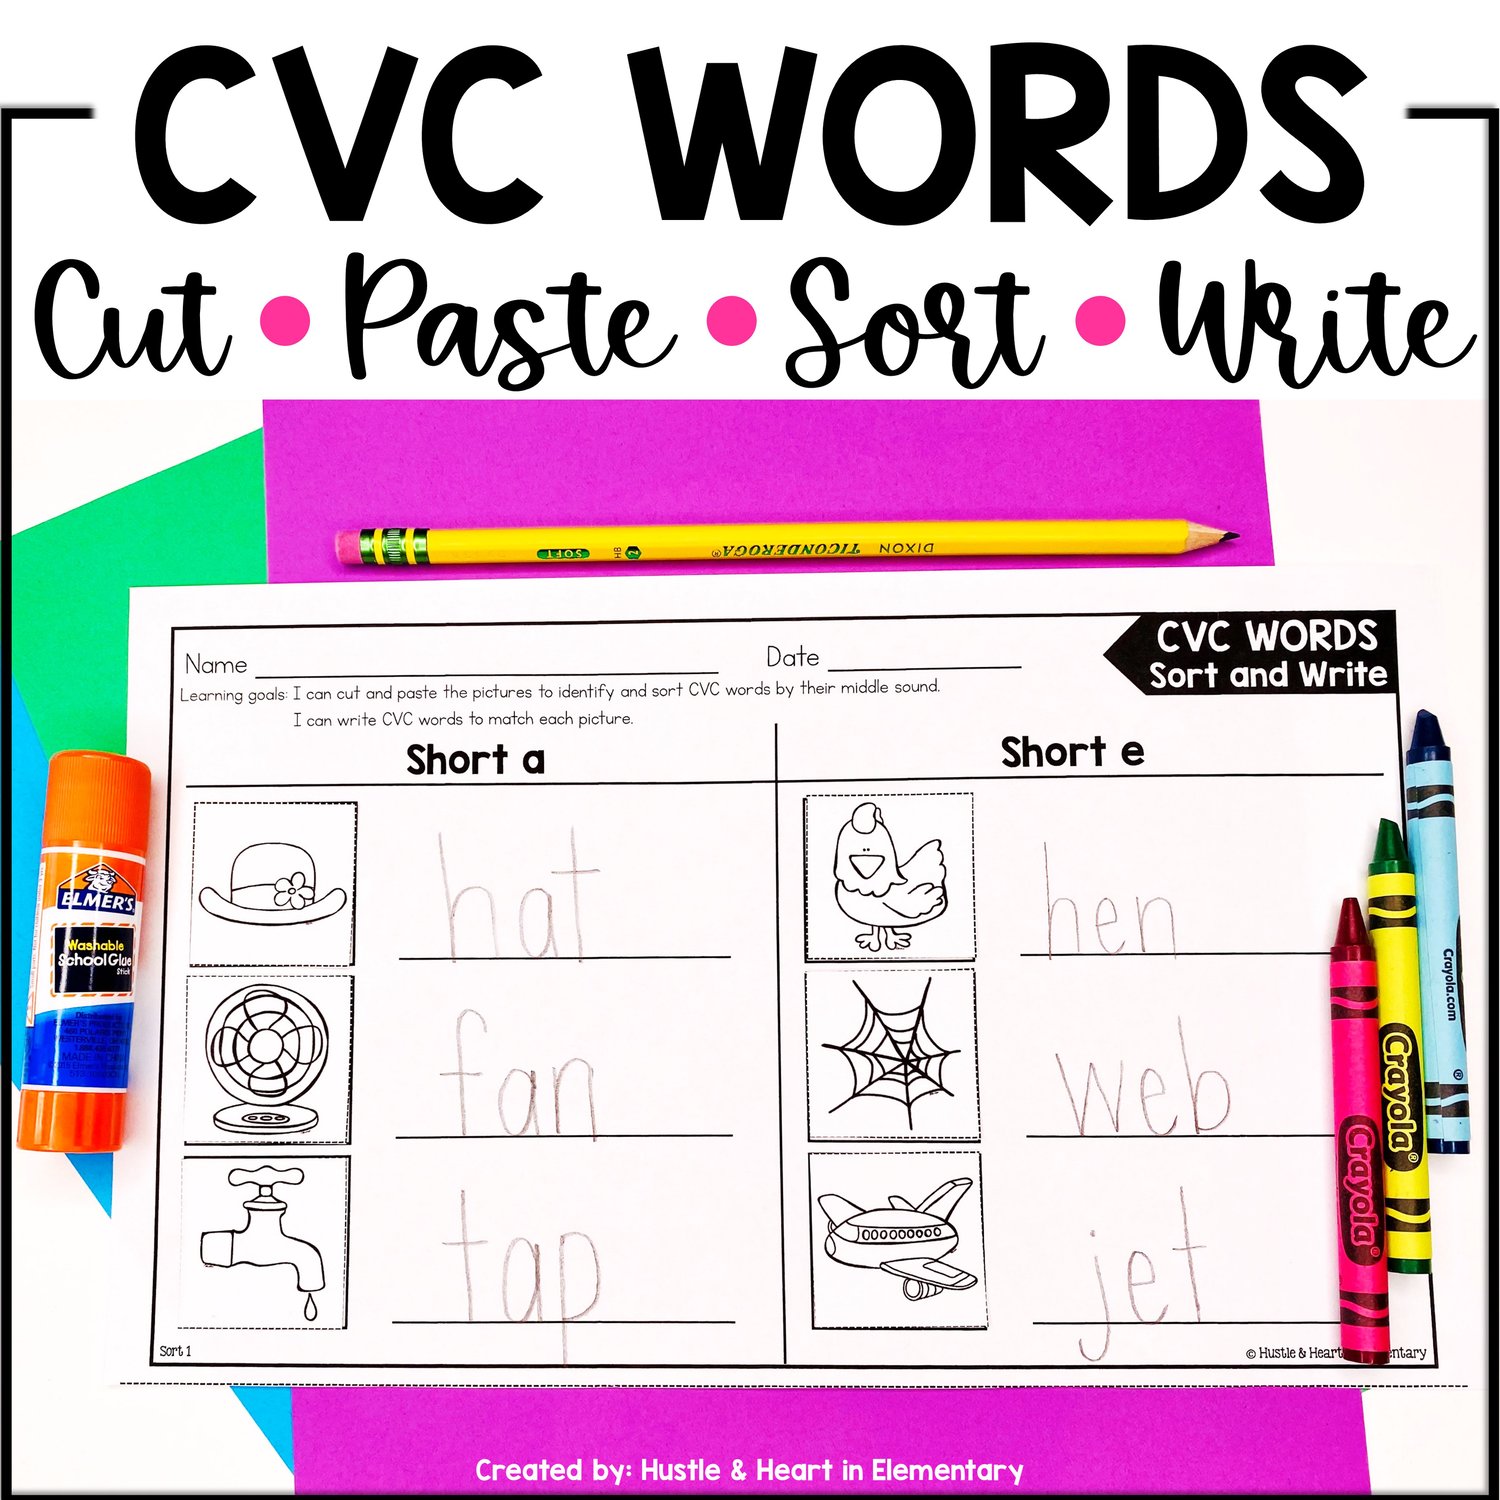 Science of reading aligned CVC word sort and write activity for K-1